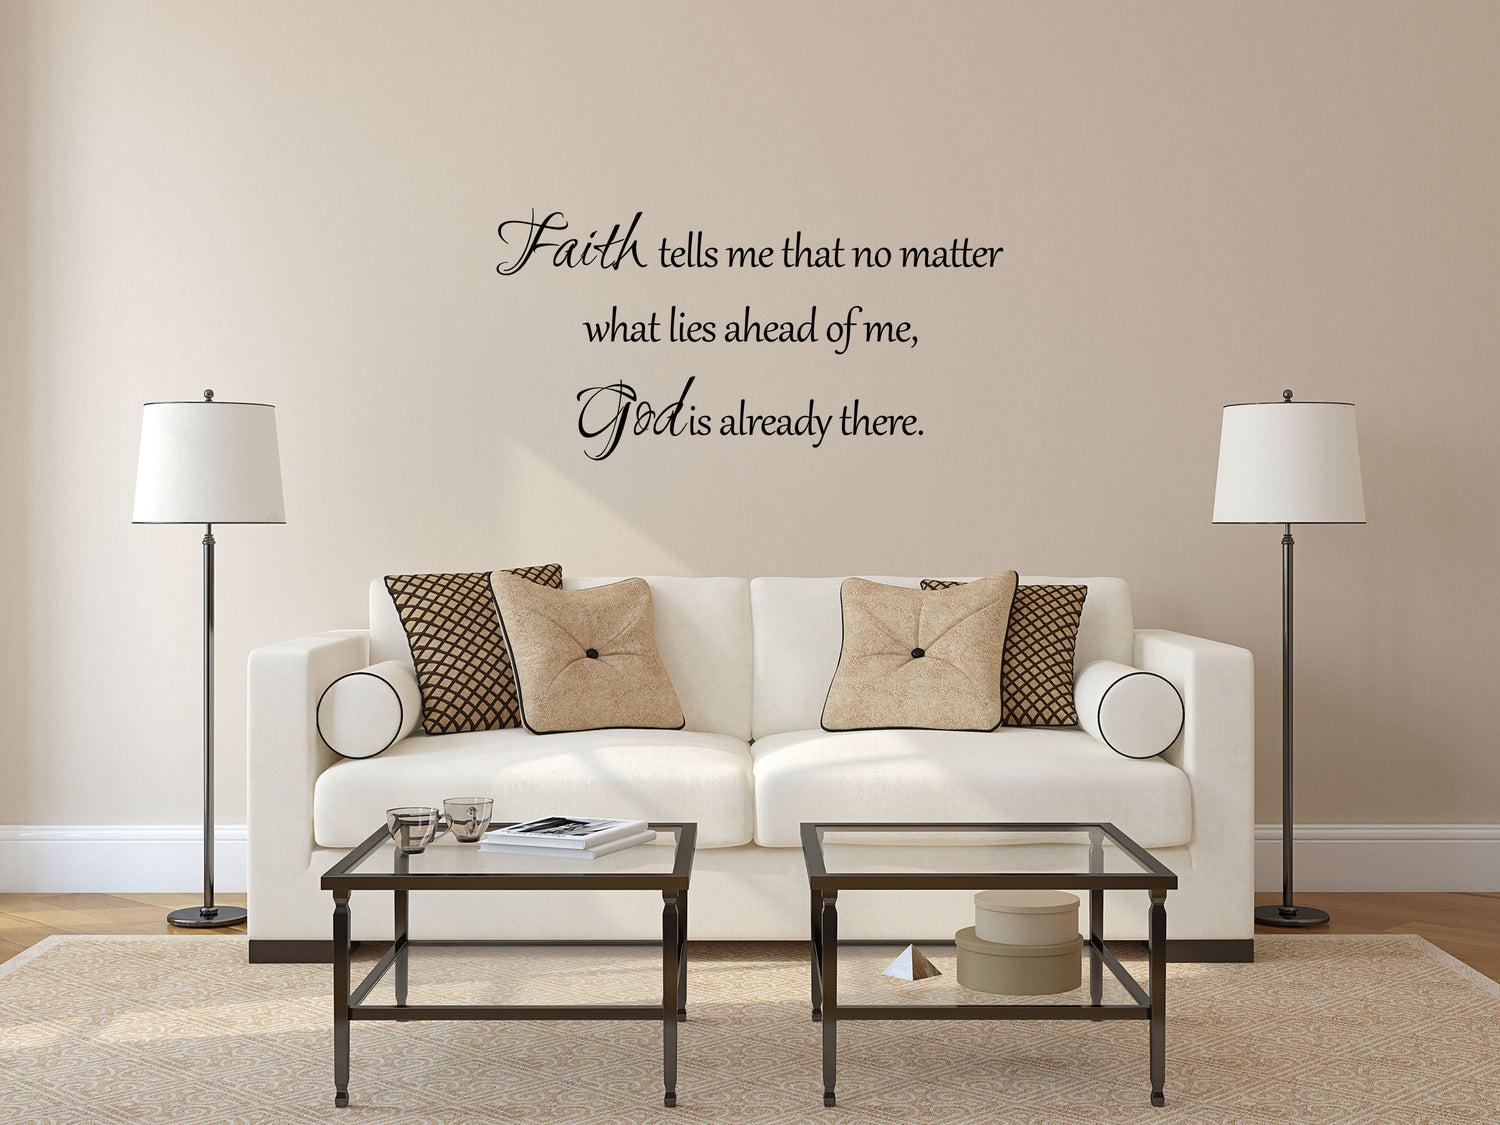 God Is Already There Vinyl Wall Decal Faith Wall Decal - Handmade Vinyl Wall Art Art Faith Tells Me - Christian Wall Decal Quote Lettering Vinyl Wall Decal Title Done 